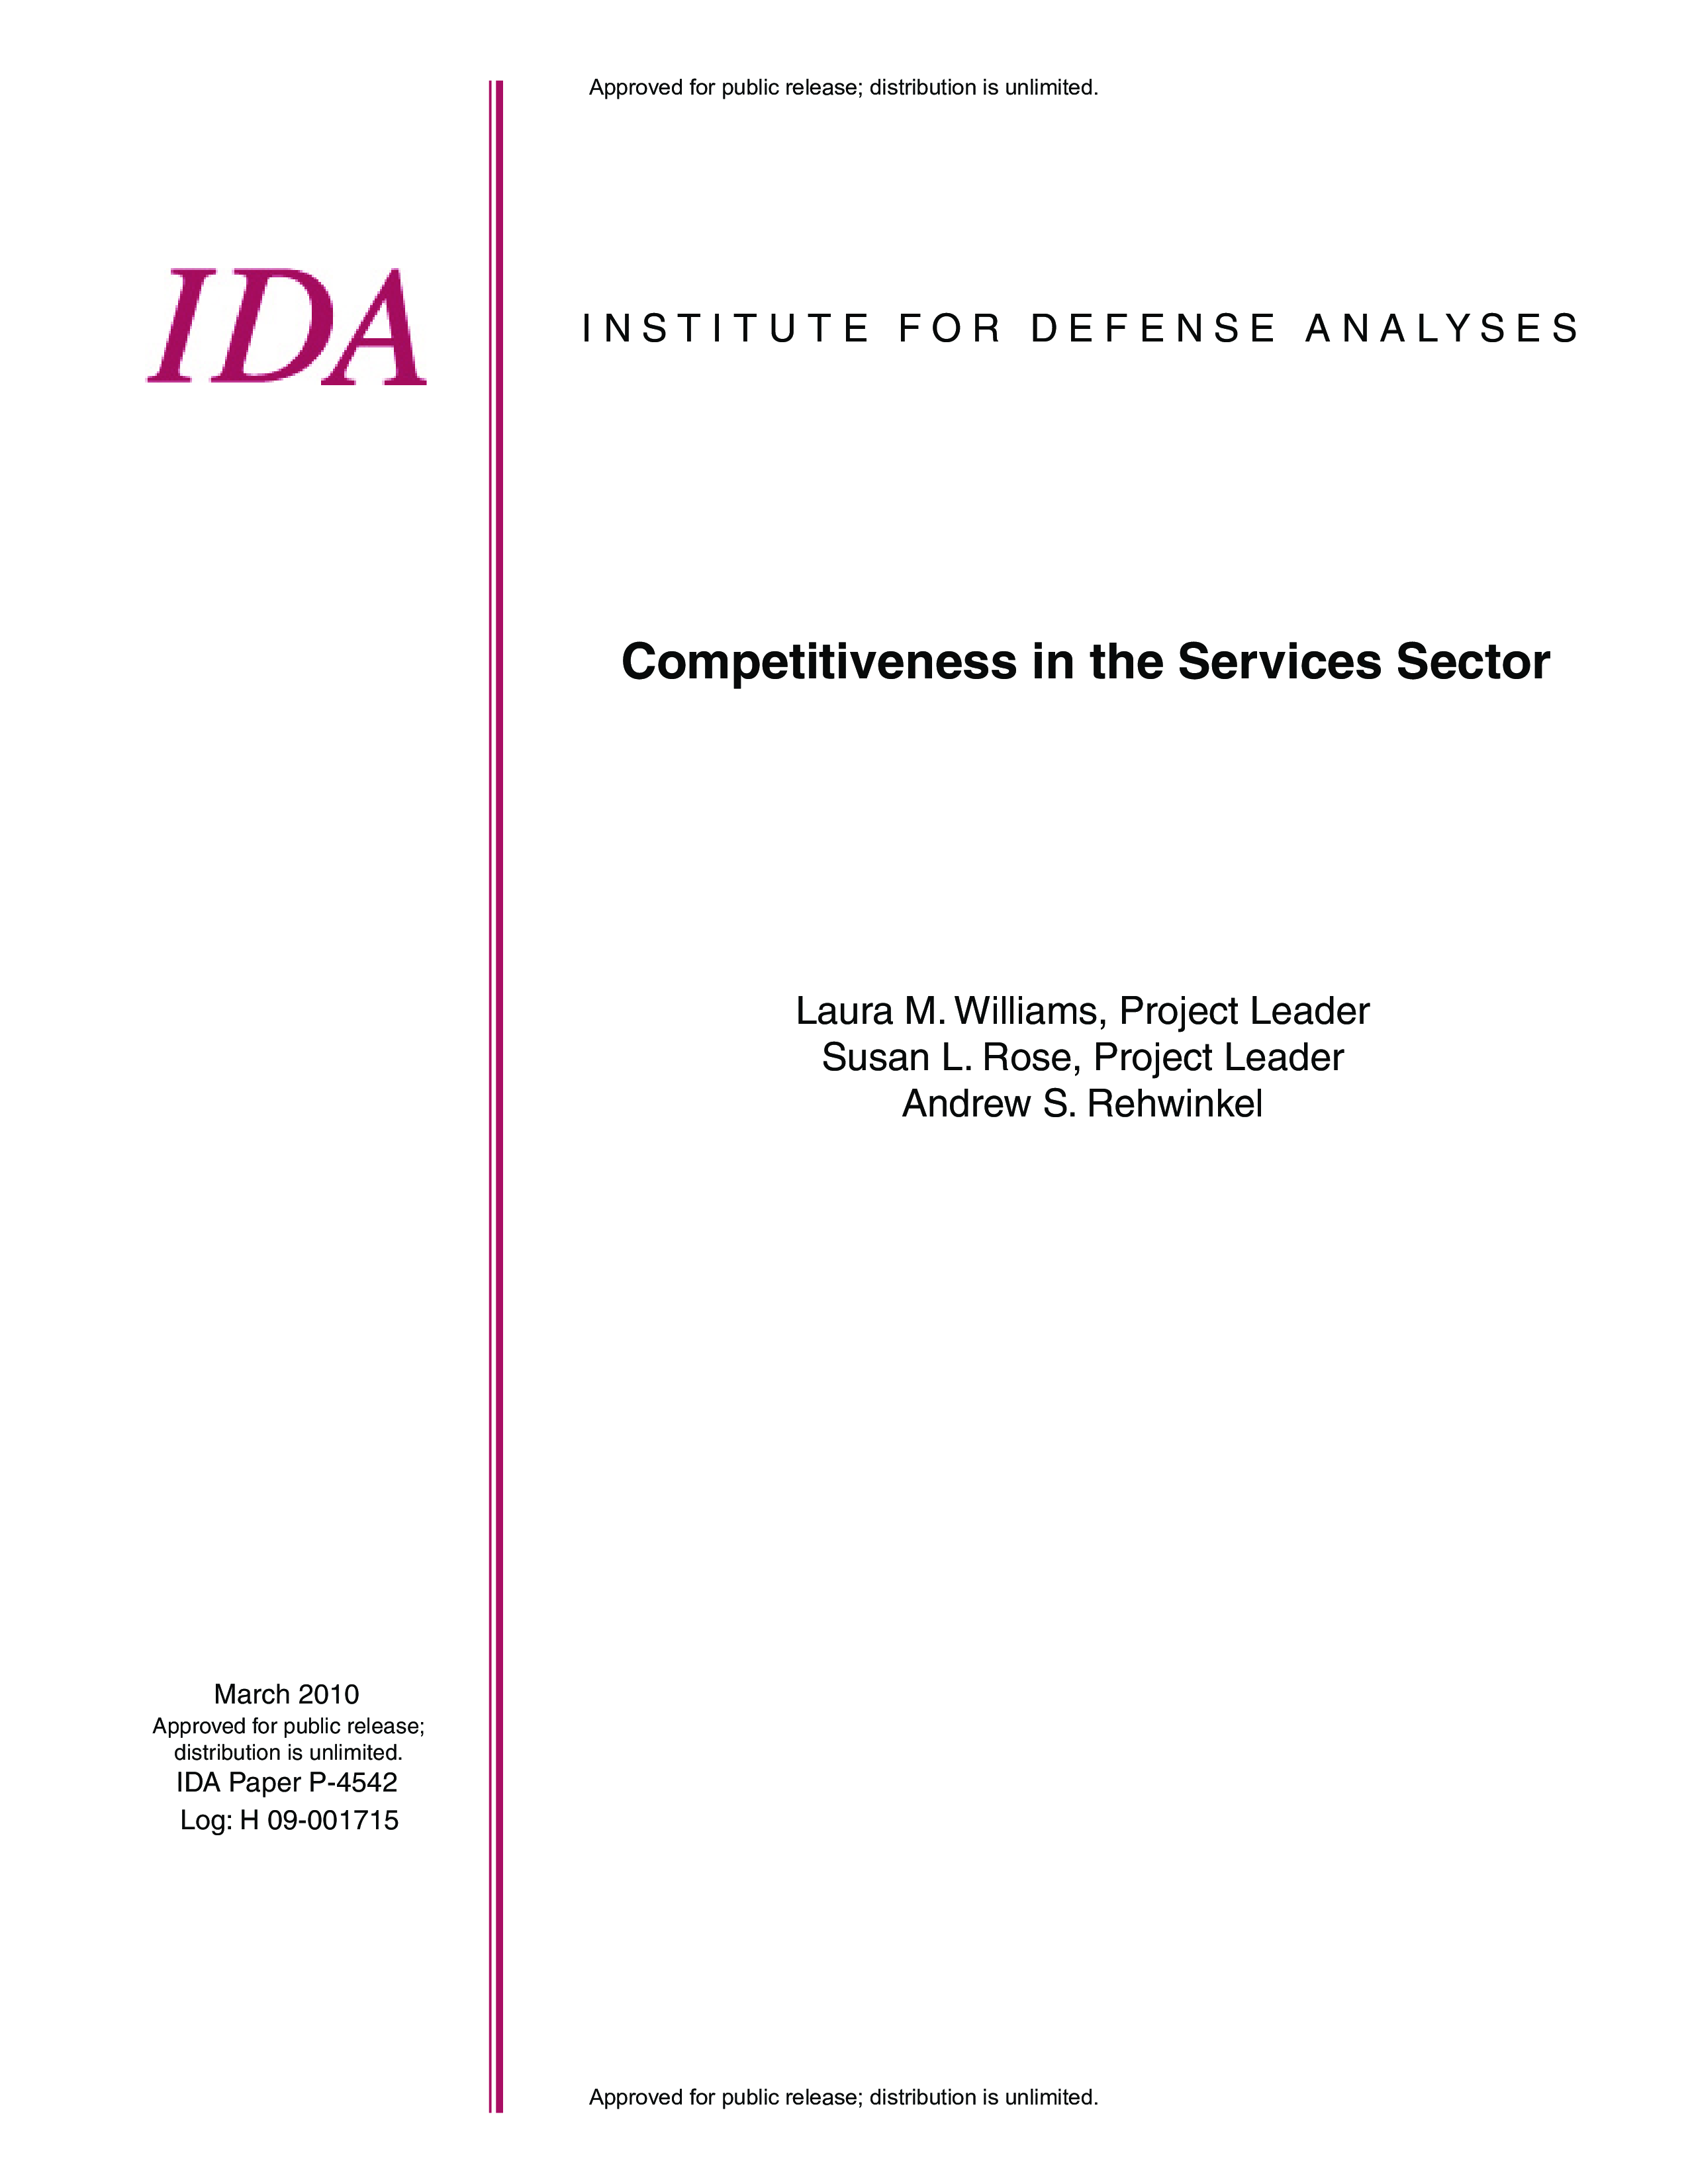 Competitiveness in the Services Sector